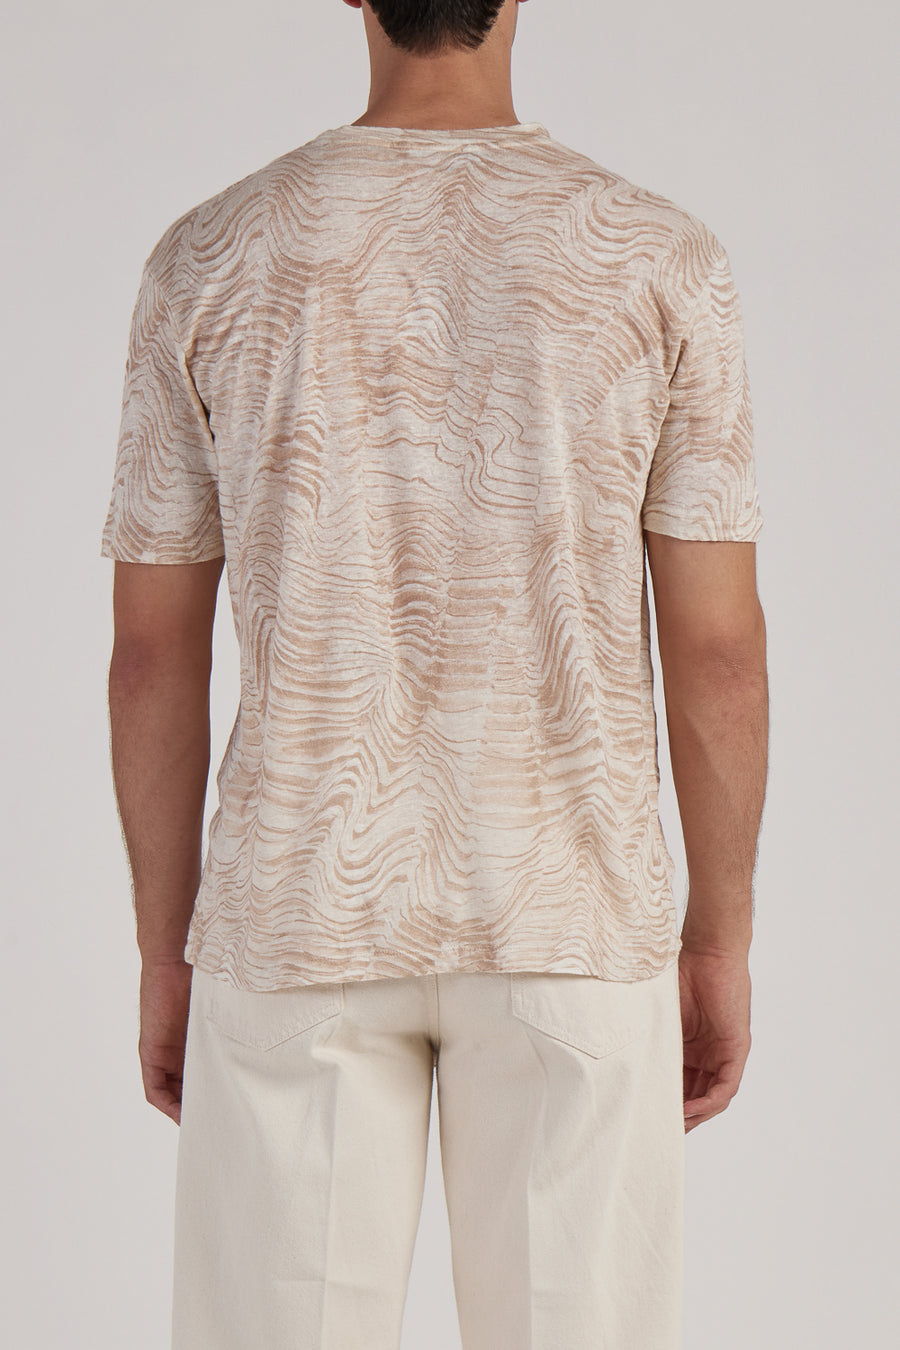 Buy the Daniele Fiesoli All Over Dunes Print Linen T-Shirt in Sand at Intro. Spend £50 for free UK delivery. Official stockists. We ship worldwide.